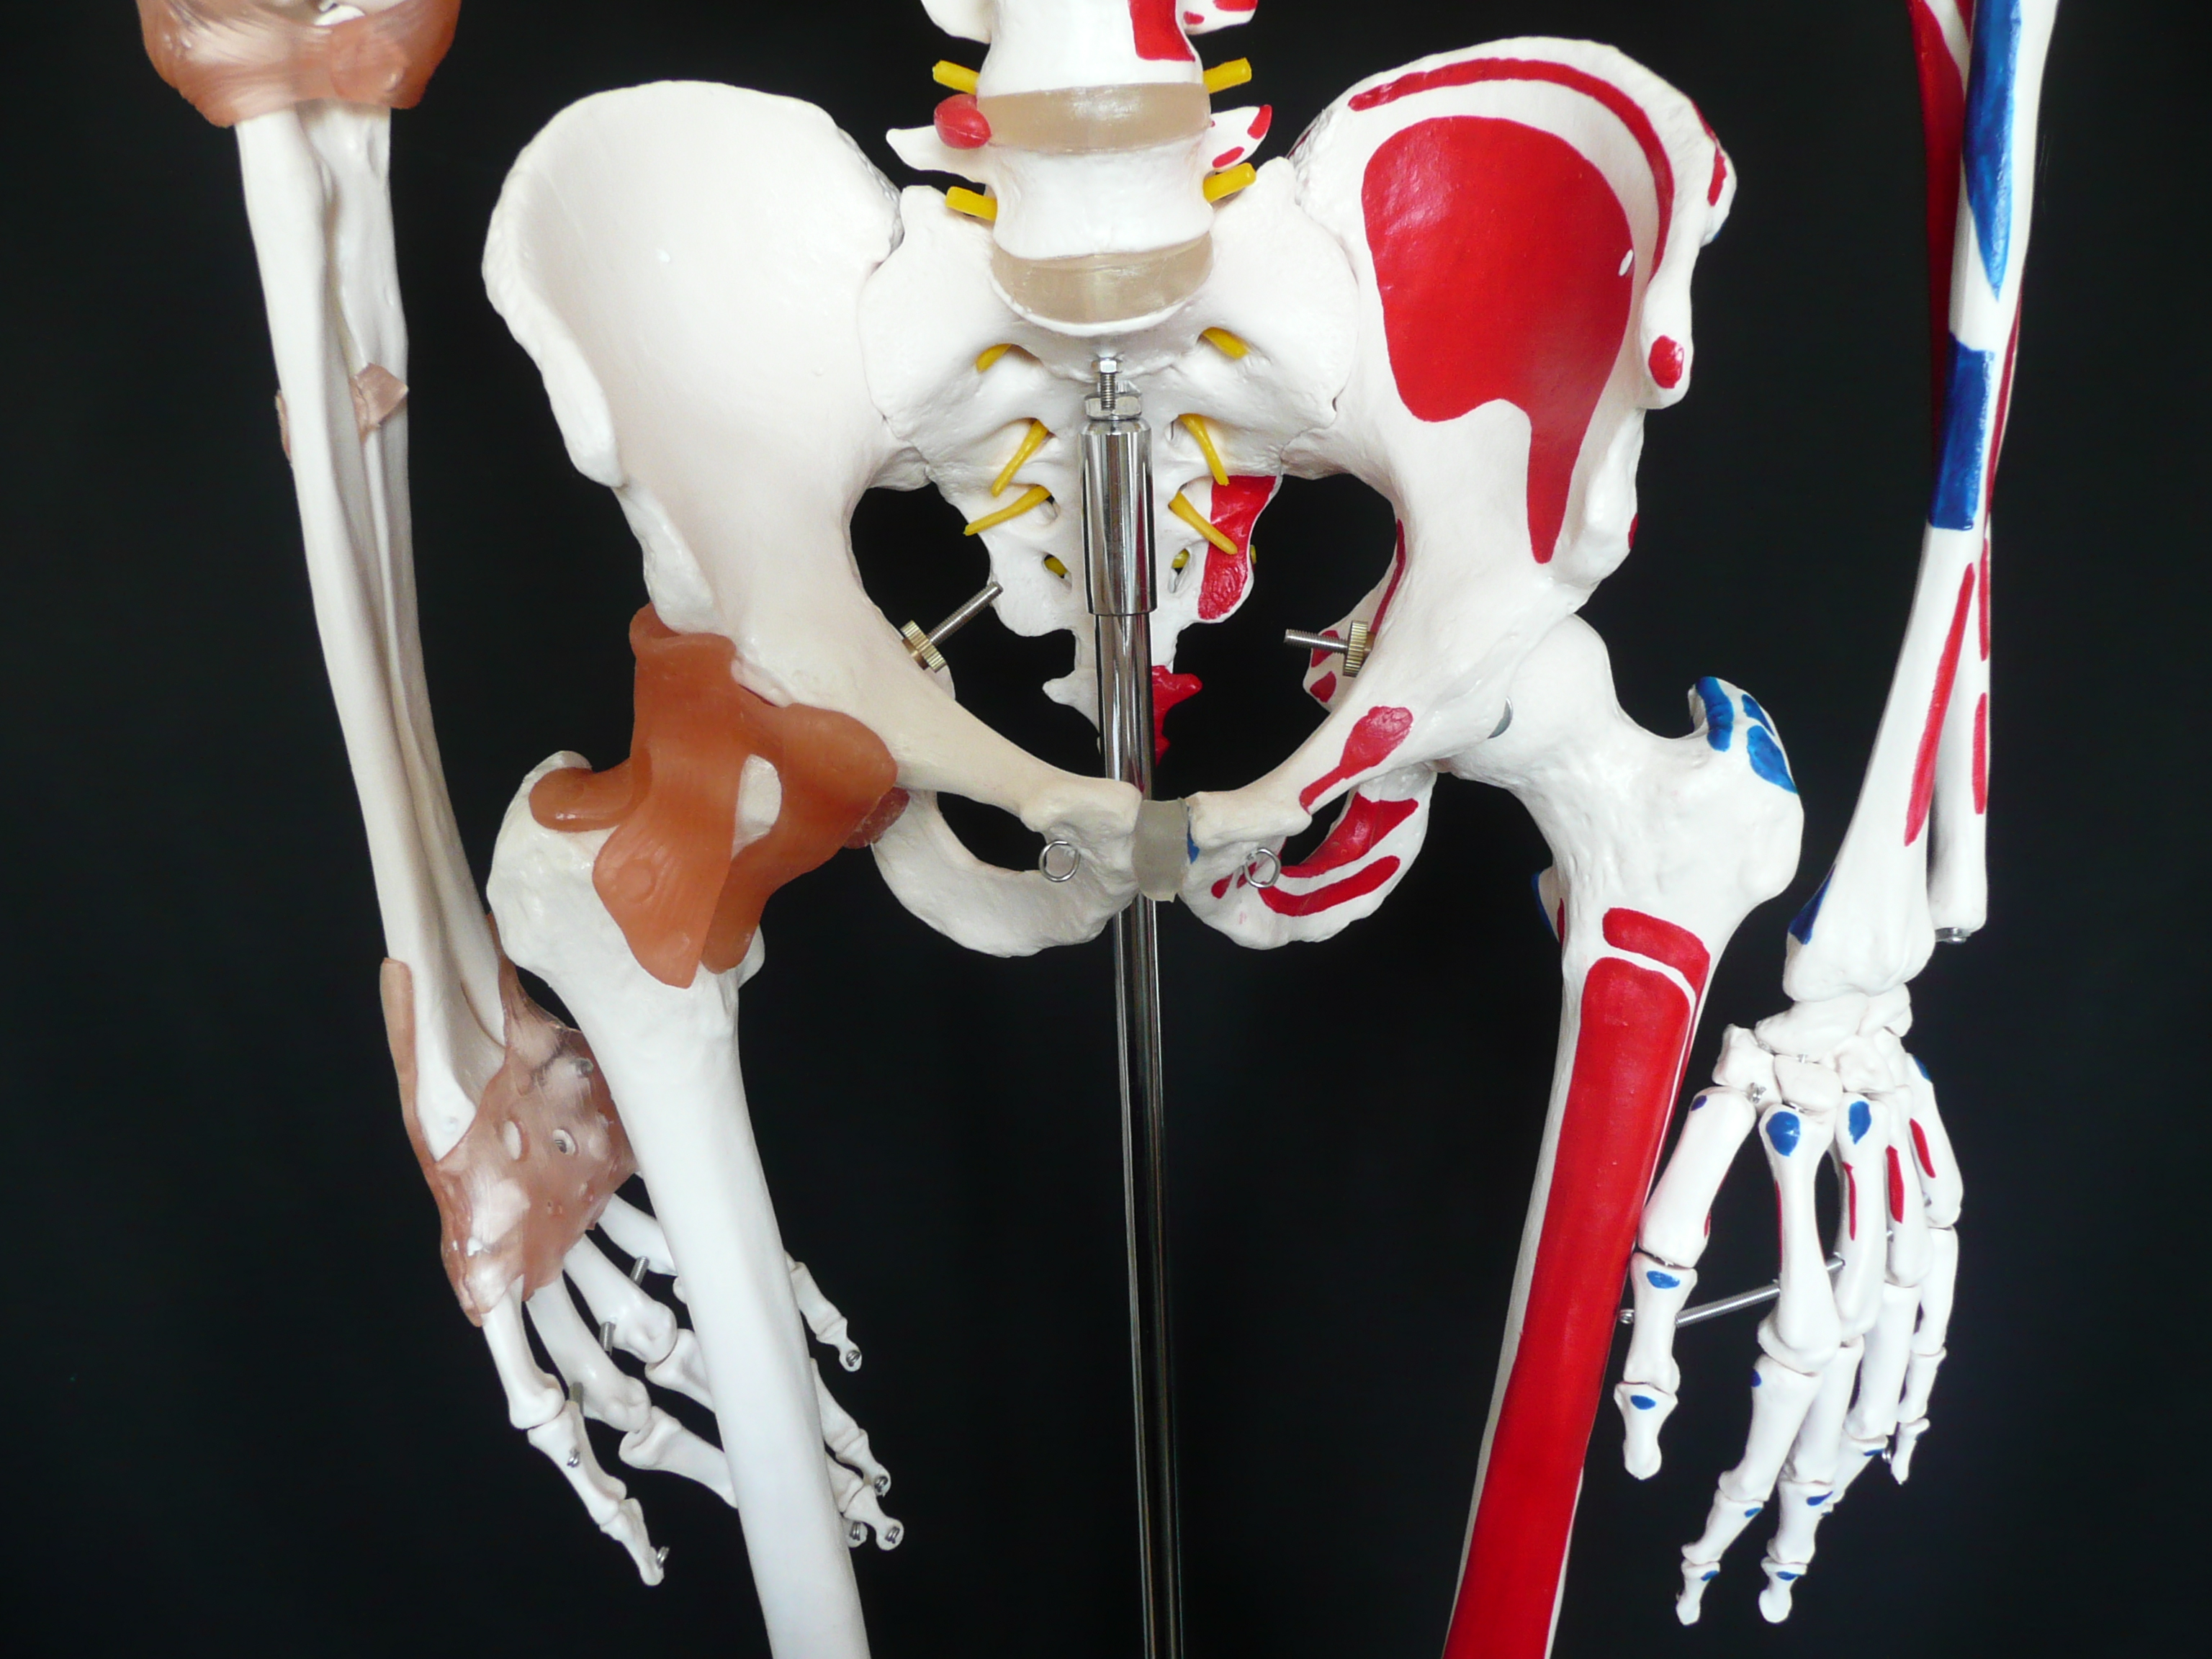 180cm Tall Life-Size Human Anatomical Skeleton Model with Ligaments